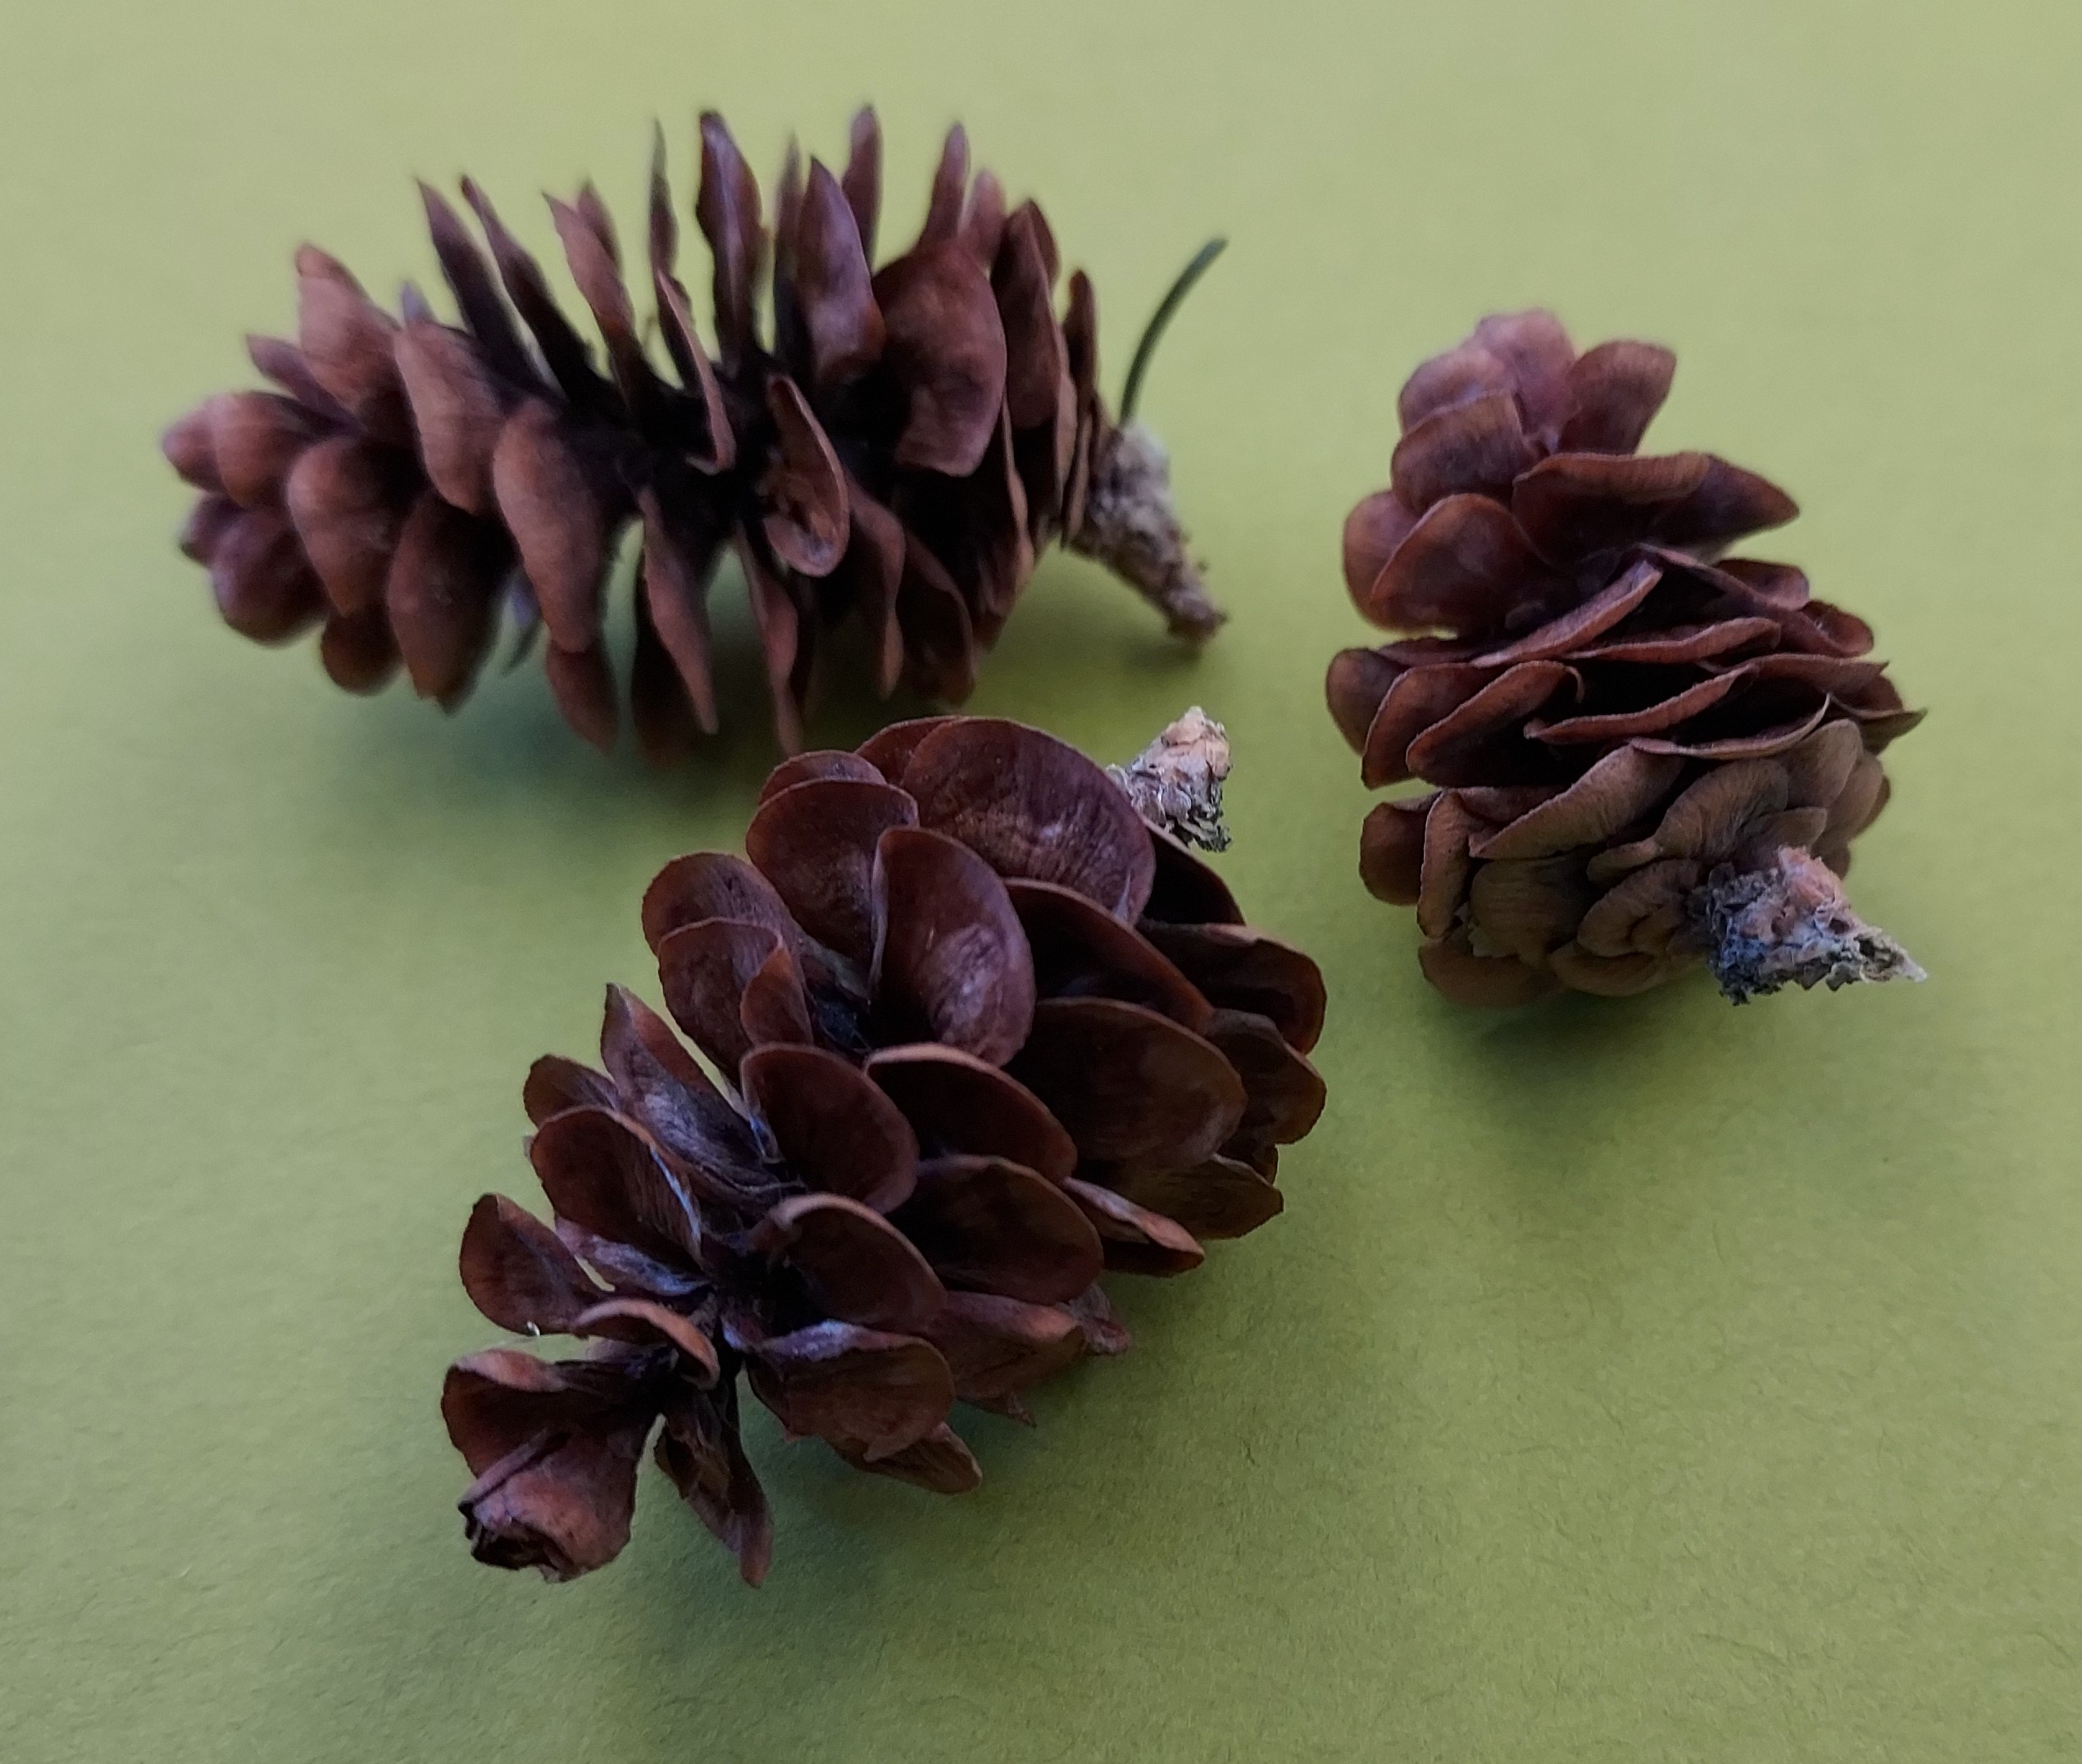 This photo shows several white spruce cones with their brown coloration.